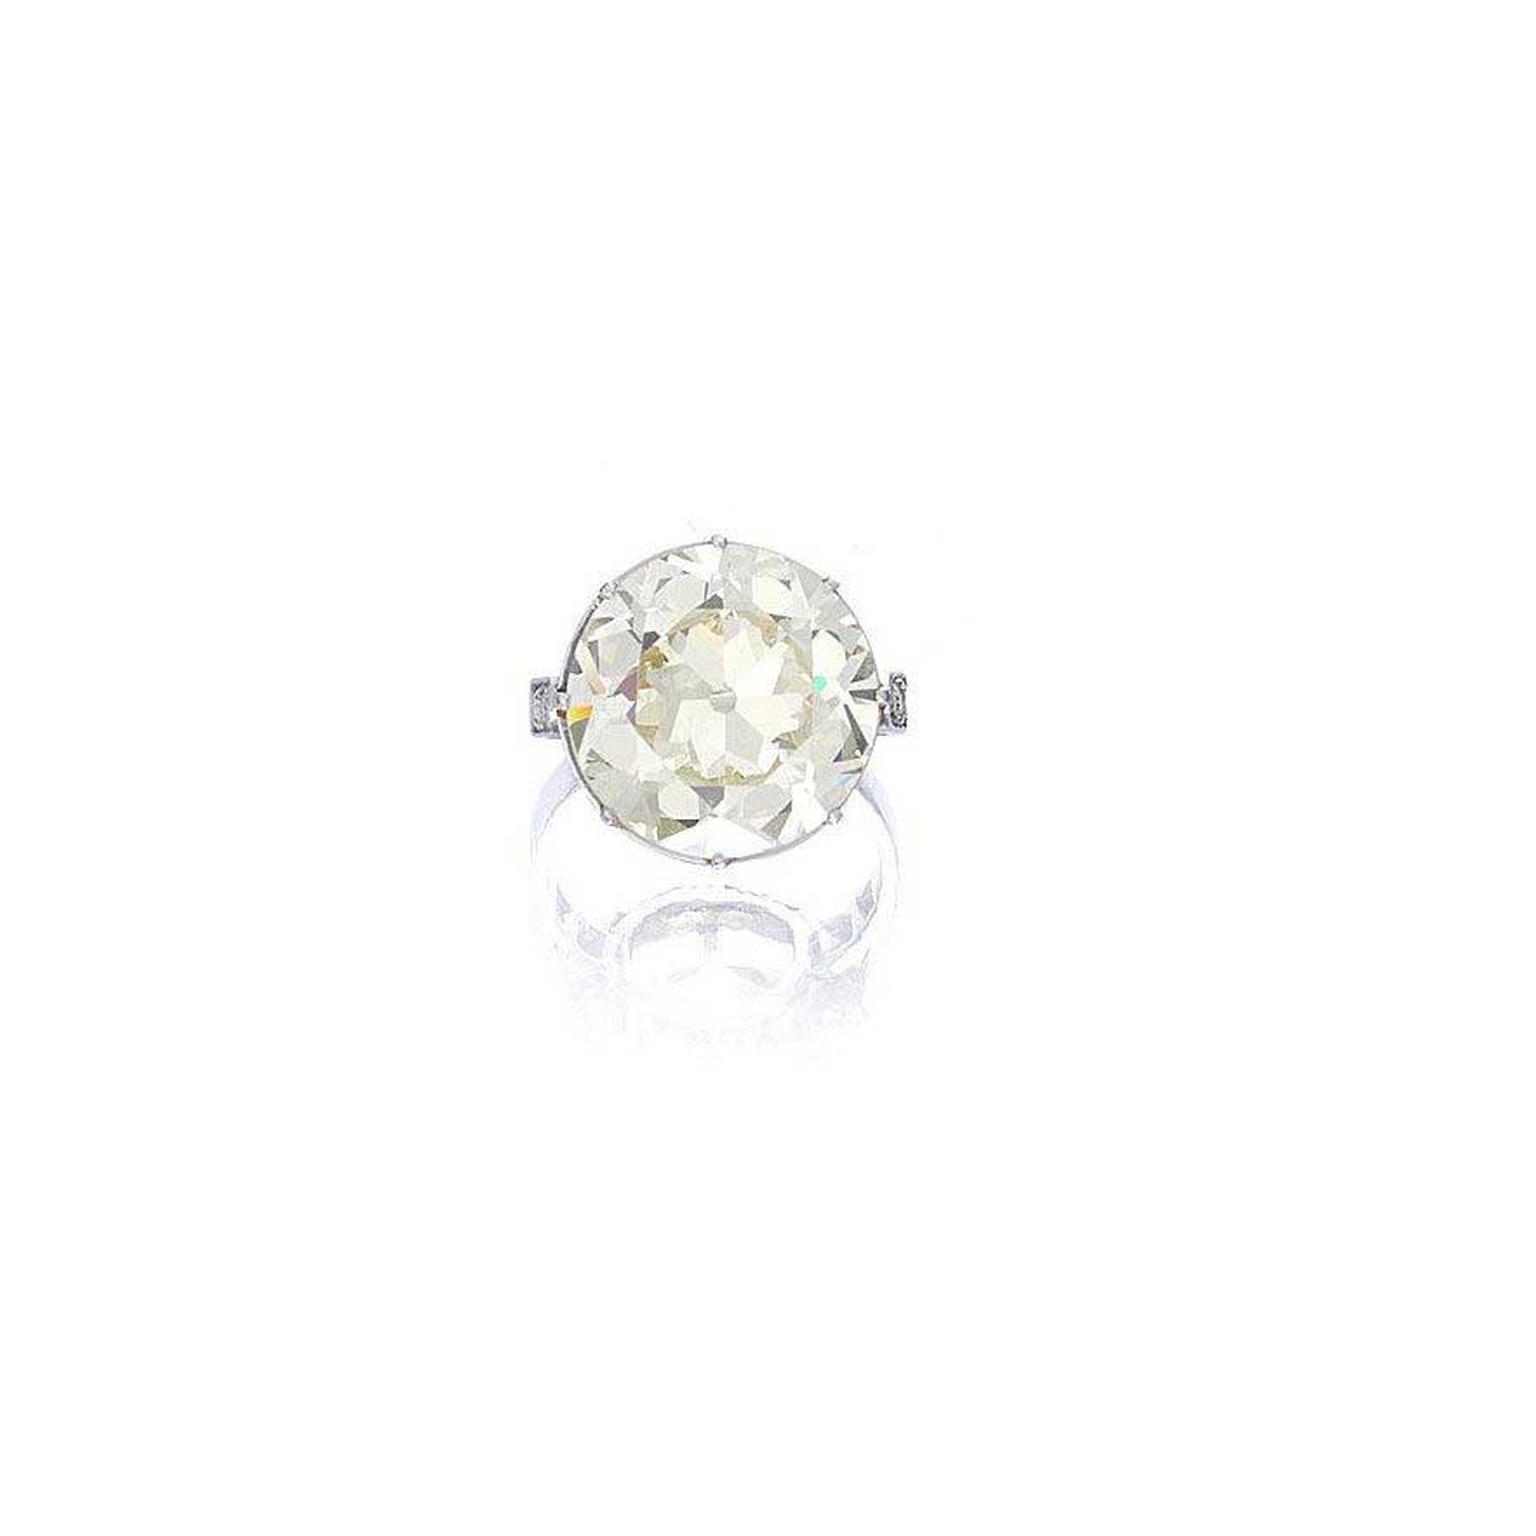 A 12.63ct fancy yellow diamond ring achieved the second highest price at the Bonhams sale, selling for £146,500.